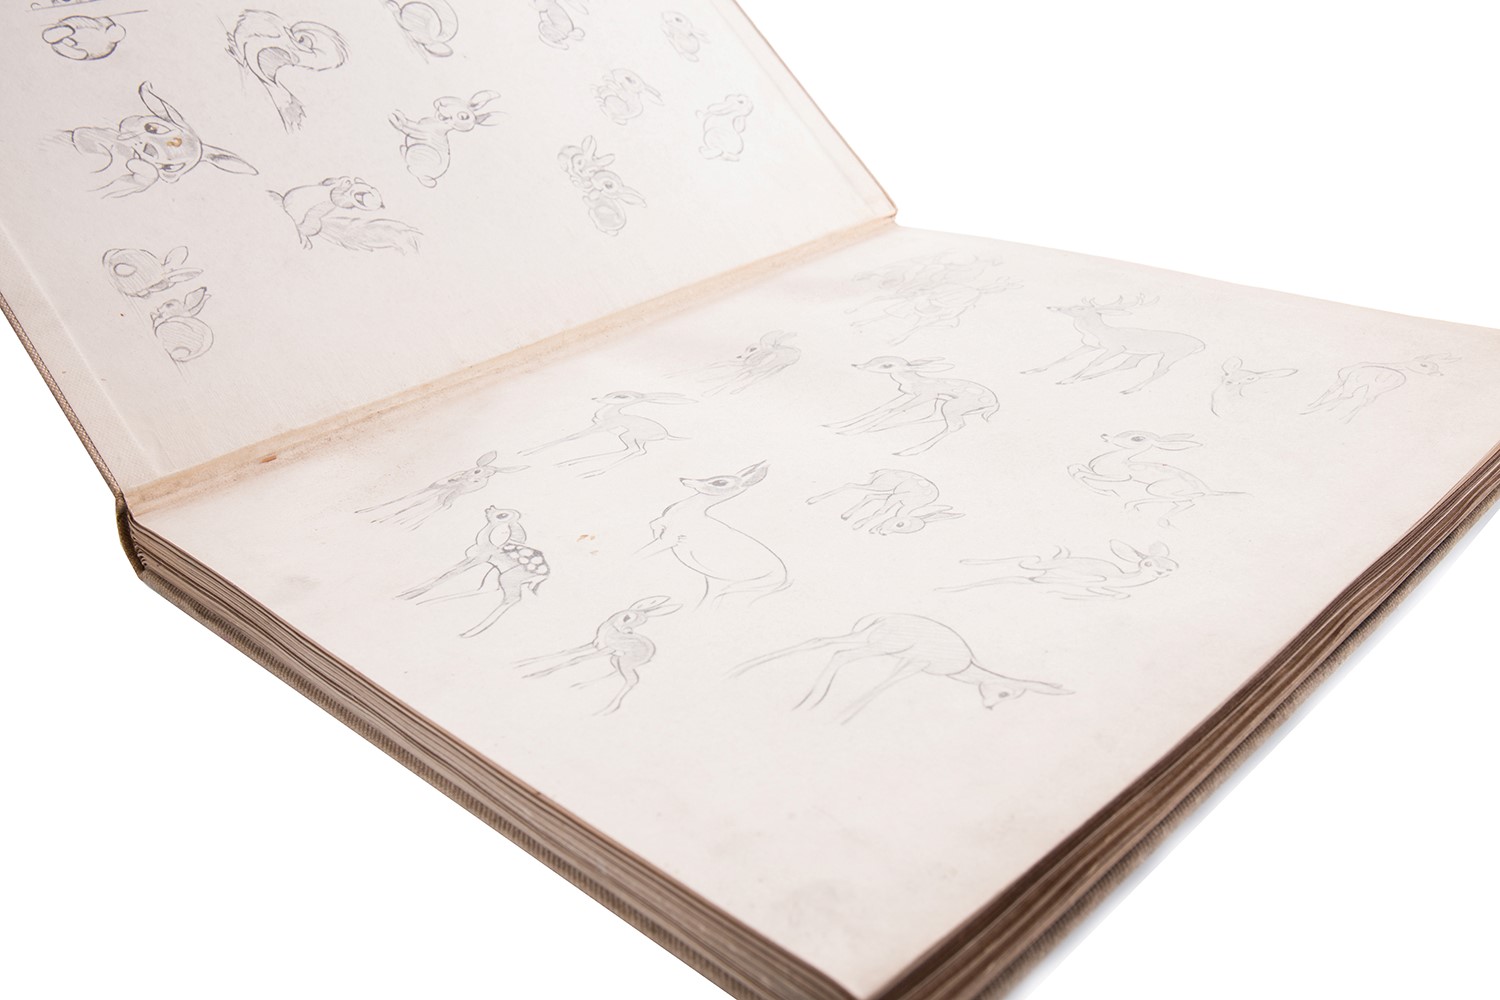 WALT DISNEY 'SKETCH BOOK' printed and bound by Wm. Collins, Sons & Co. - Image 4 of 18